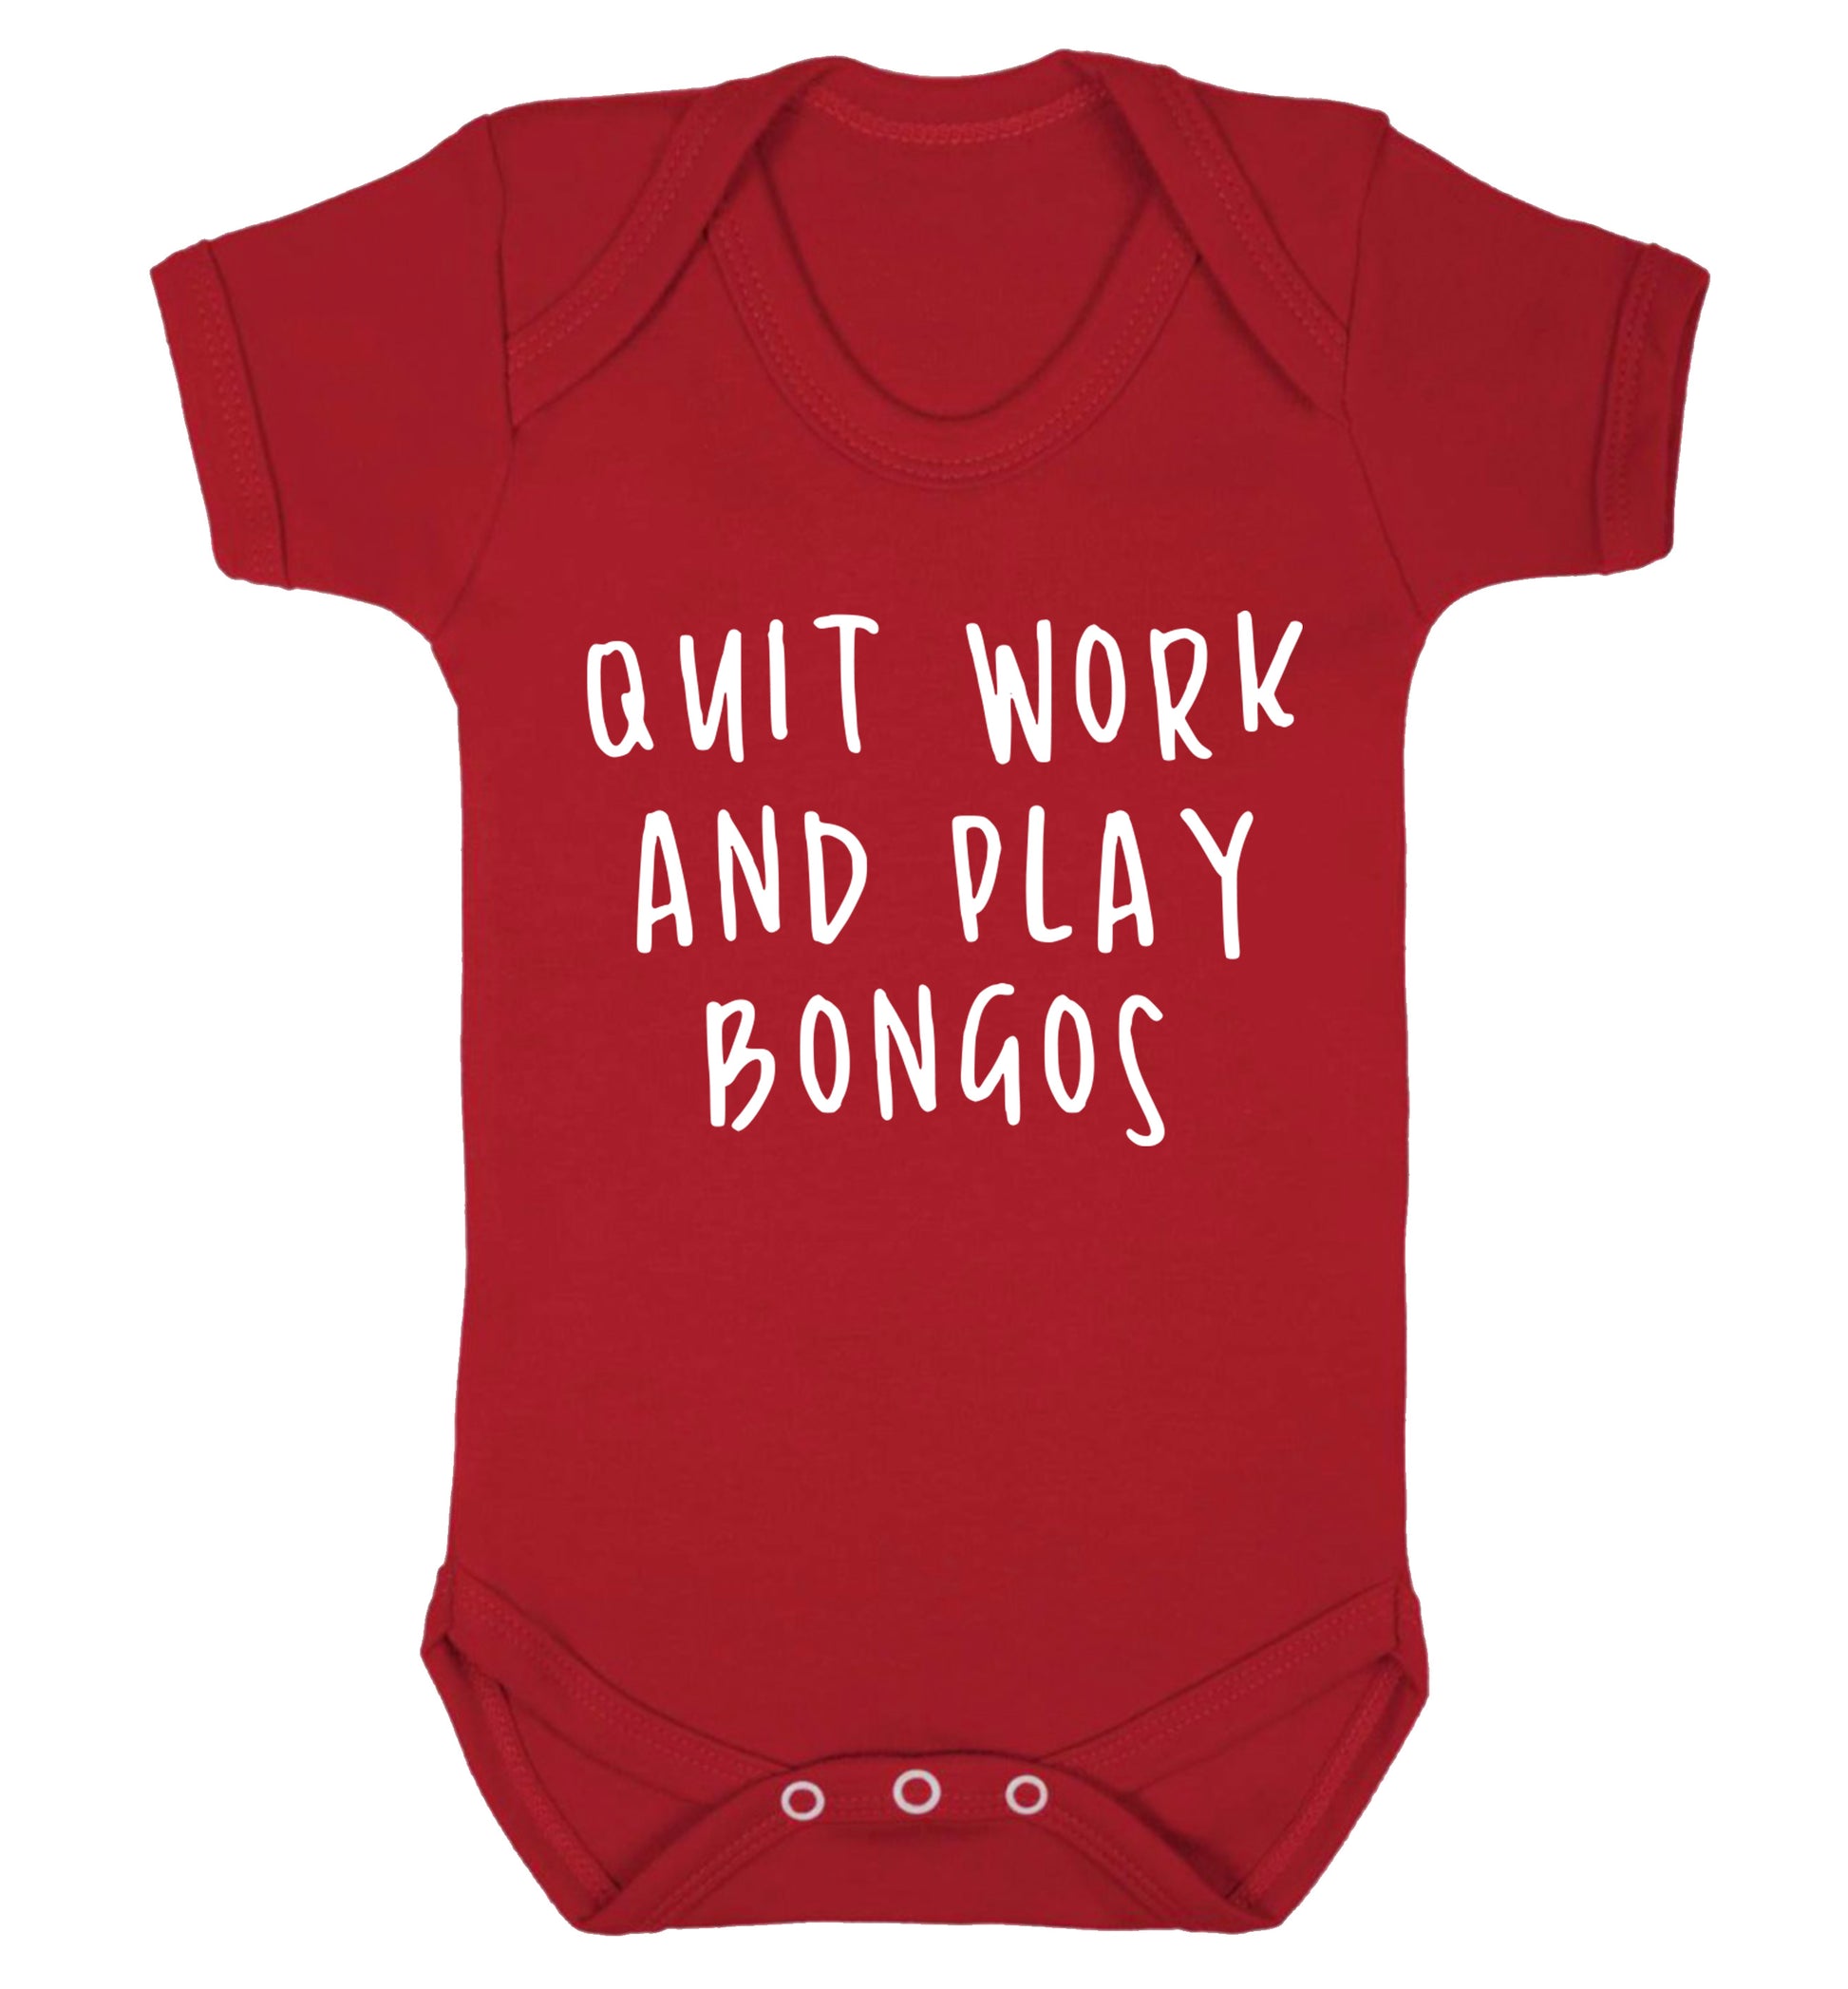 Quit work and play bongos Baby Vest red 18-24 months